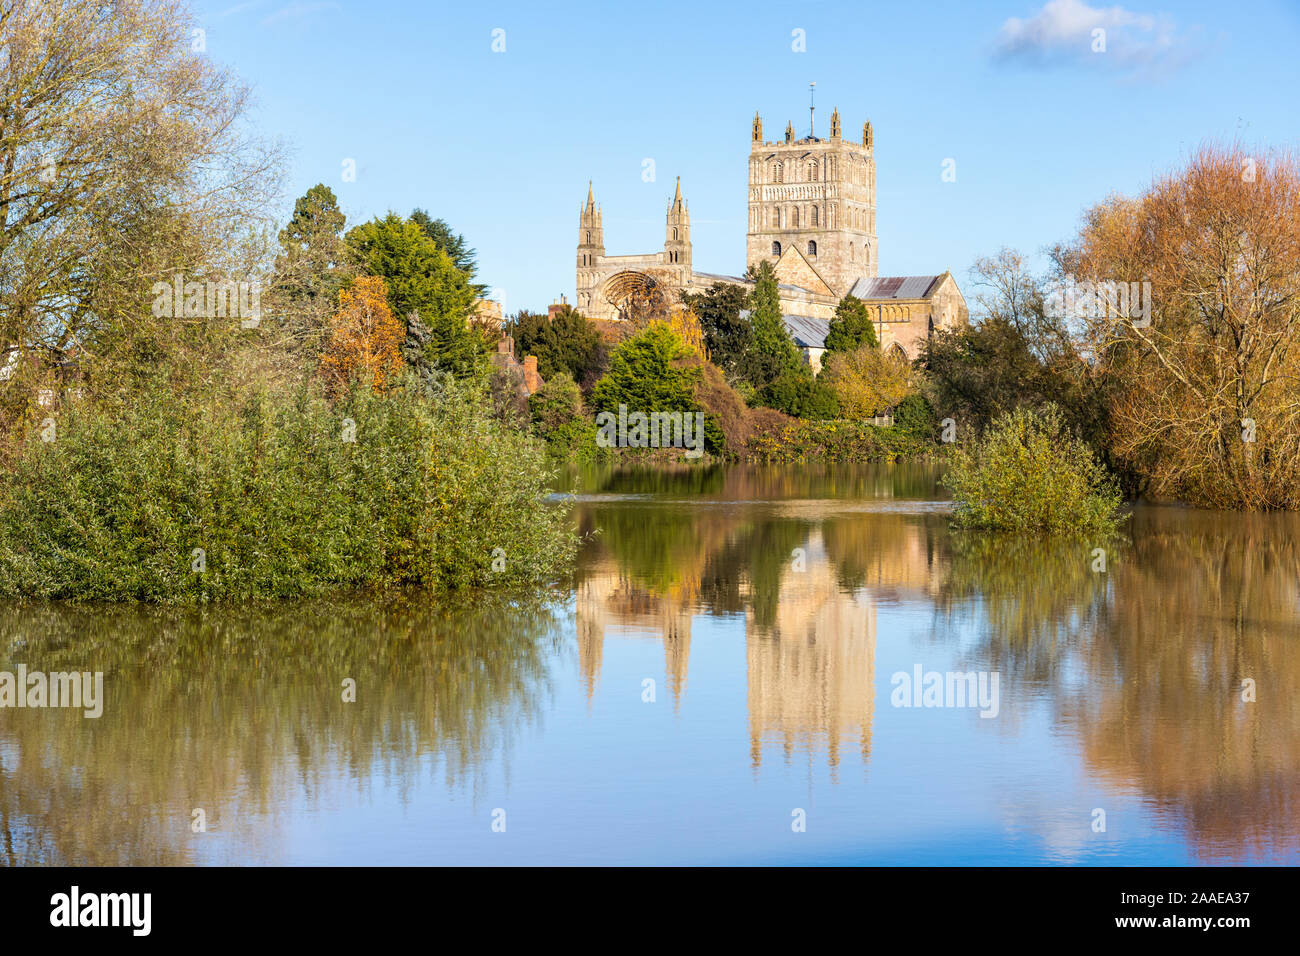 Tewkesbury Abbey reflected in floodwater on 18/11/2019. Tewkesbury, Severn Vale, Gloucestershire UK Stock Photo